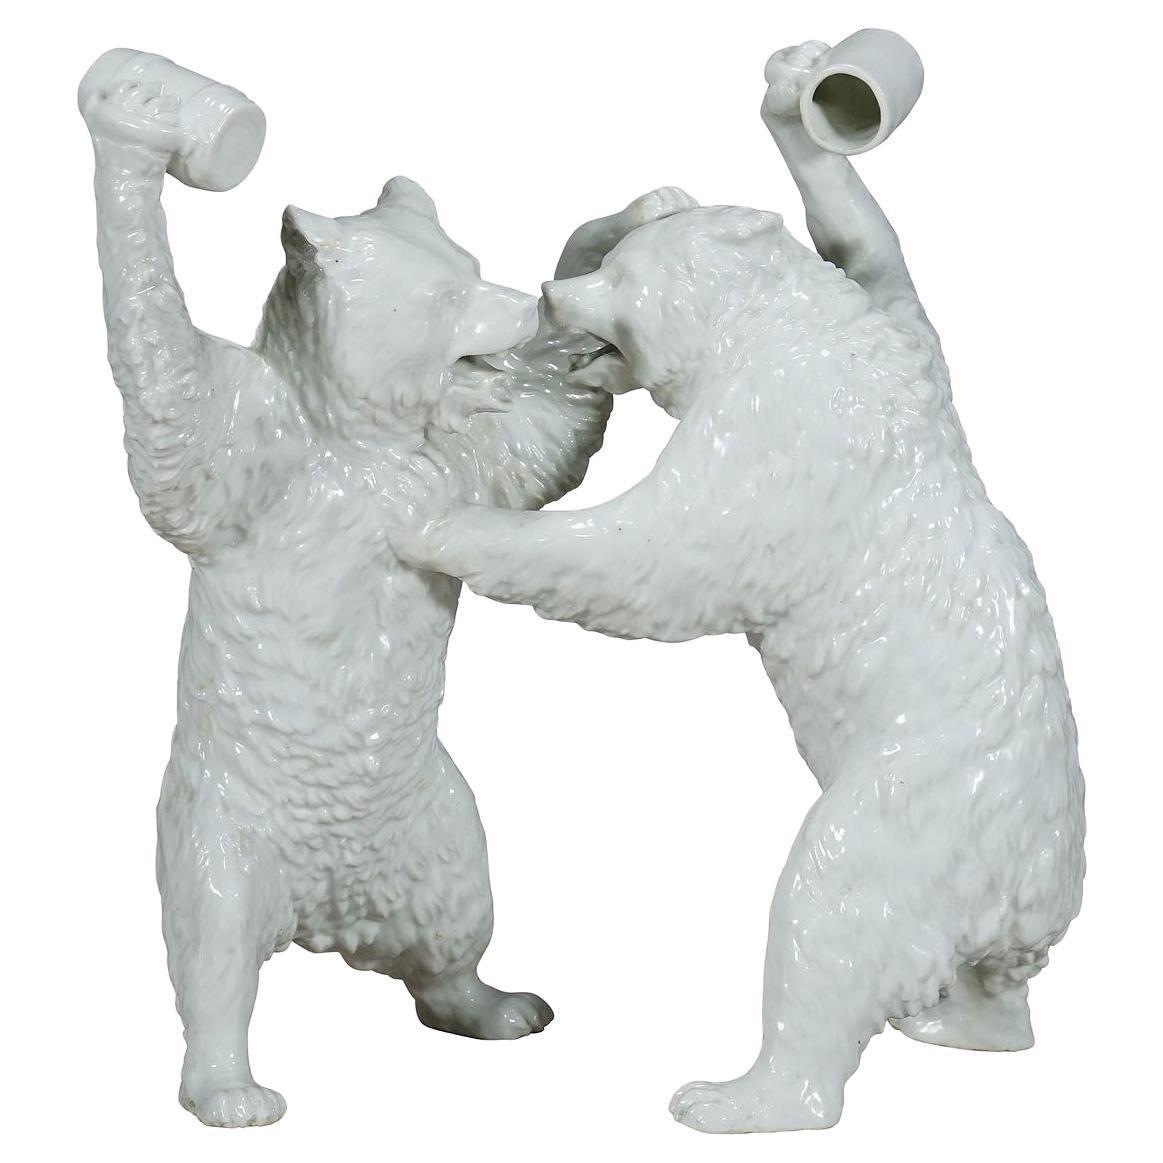 Antique Fighting Bears Porcelaine Sculpture, Germany ca. 1920s